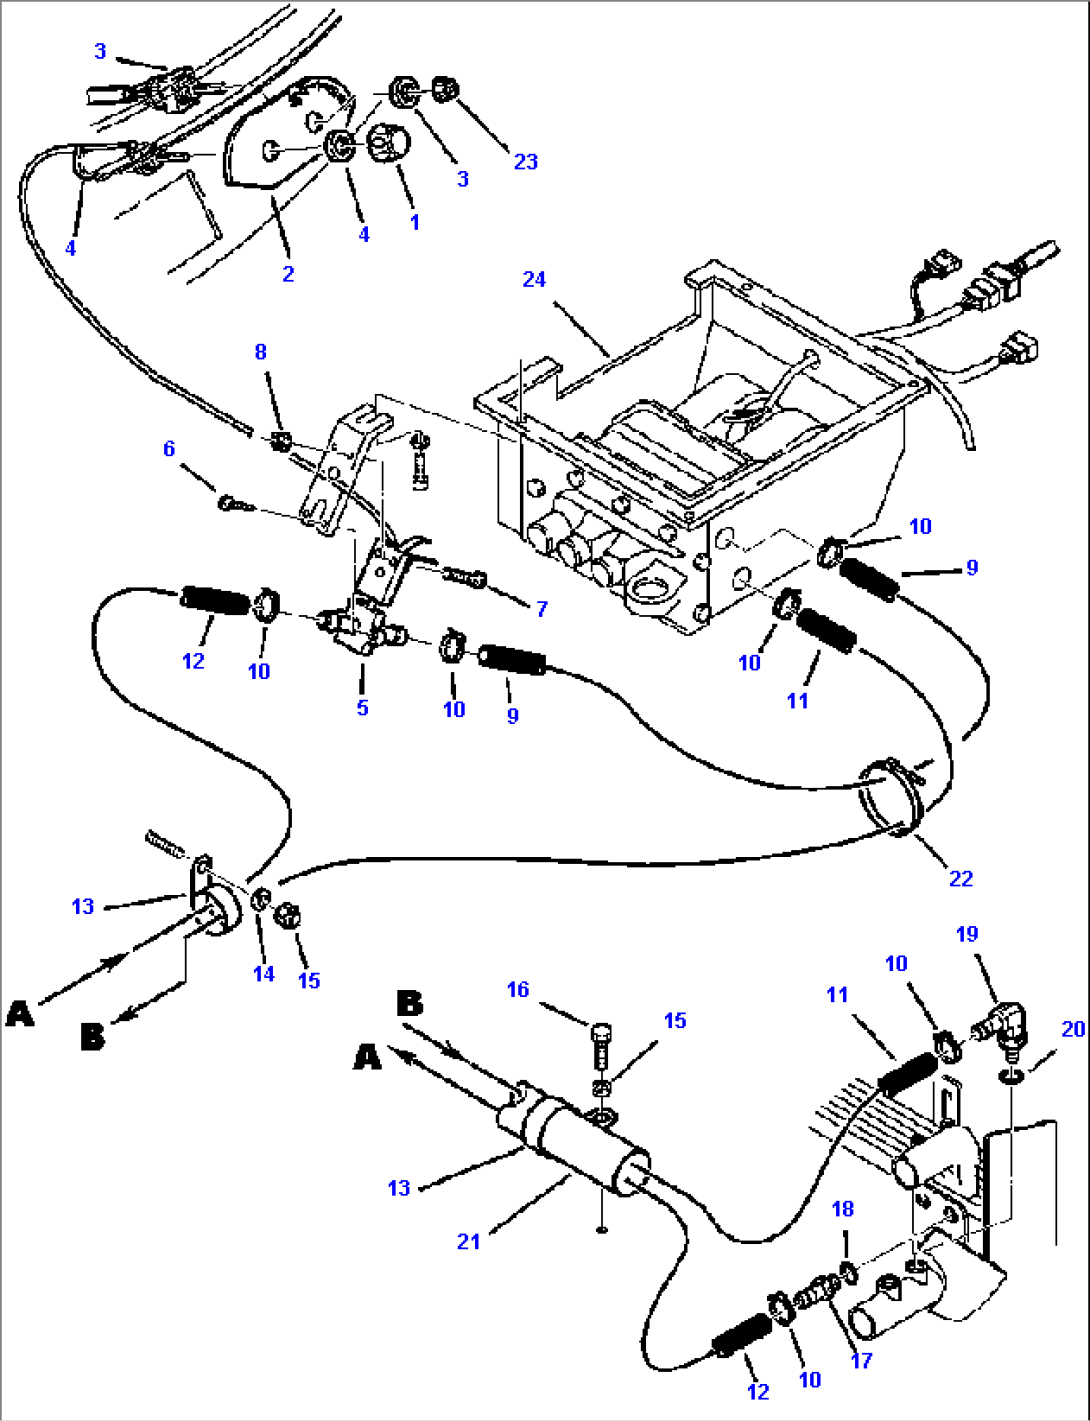 FIG. K5700-01A5 AIR CONDITIONER - HEATER CONTROLS AND PIPING